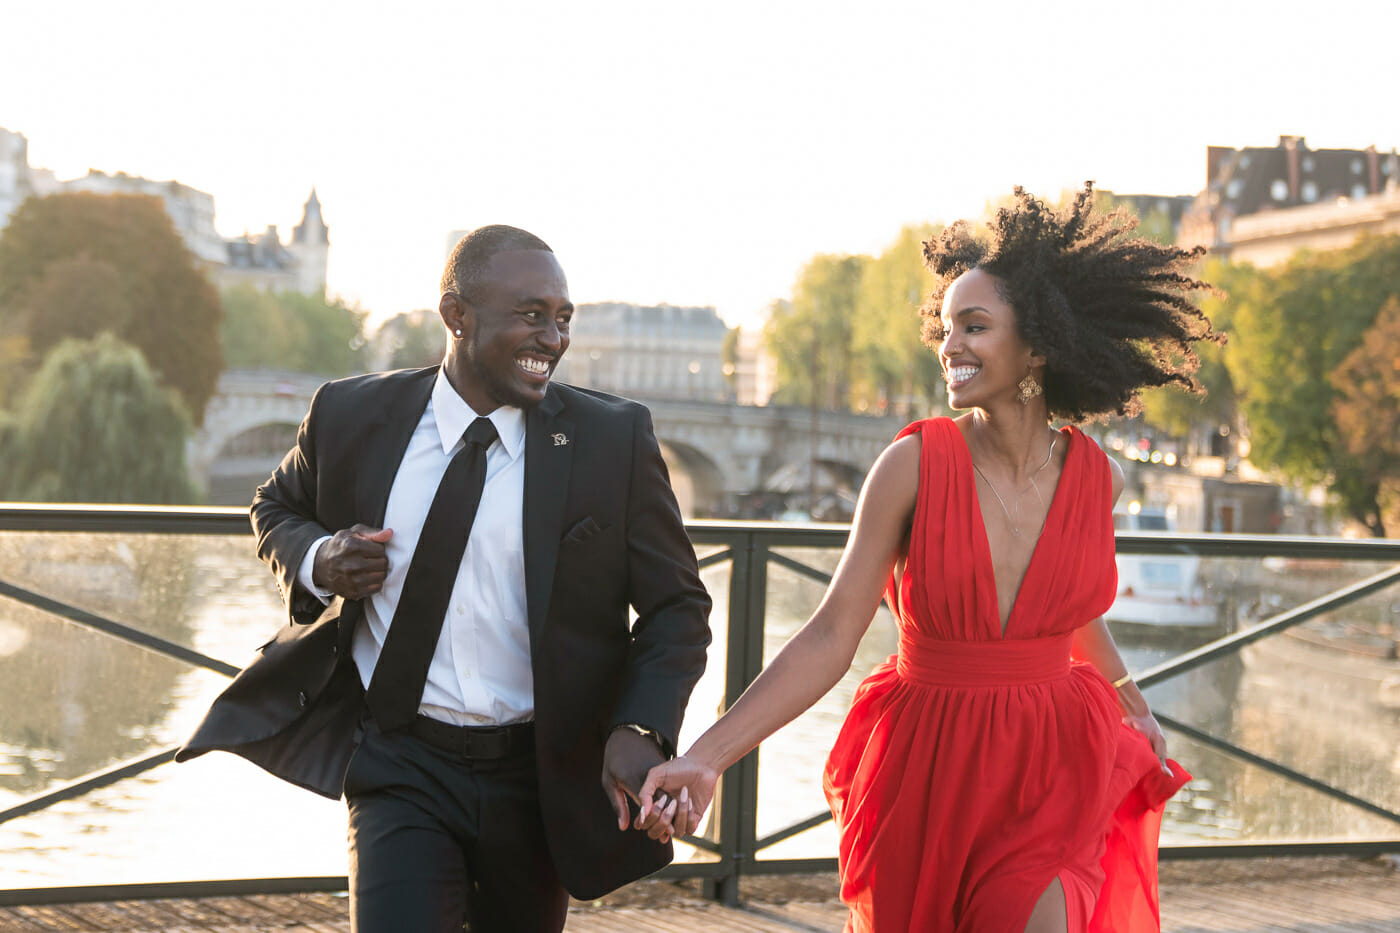 How to pose for amazing Paris engagement photos as a couple